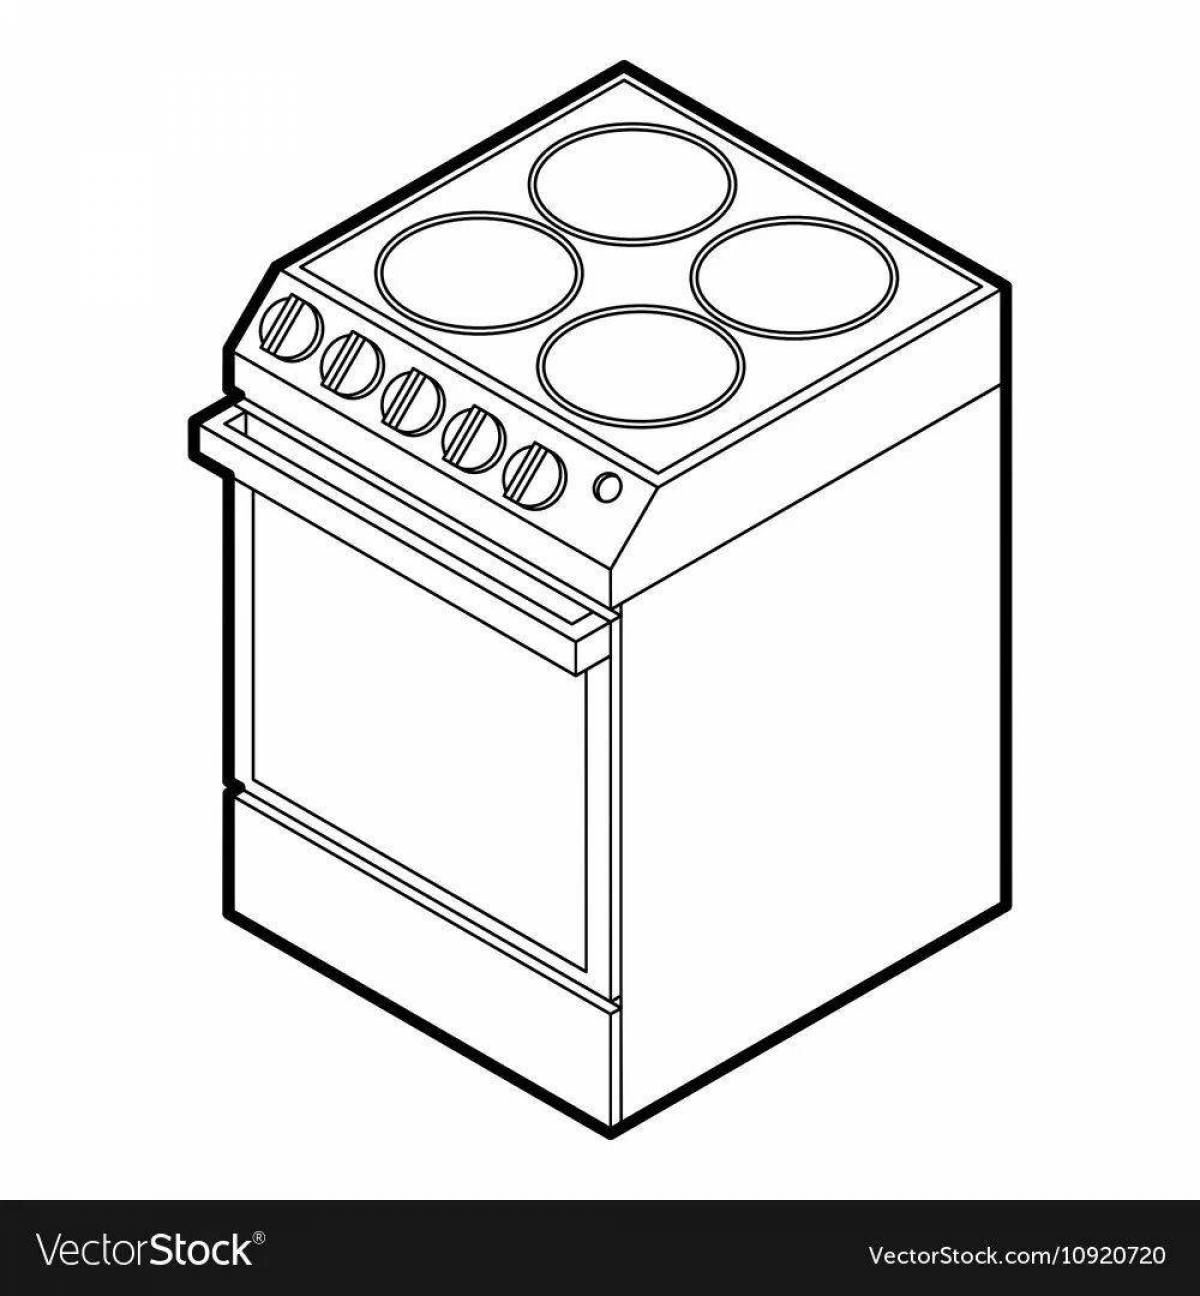 Coloring book gorgeous cooker